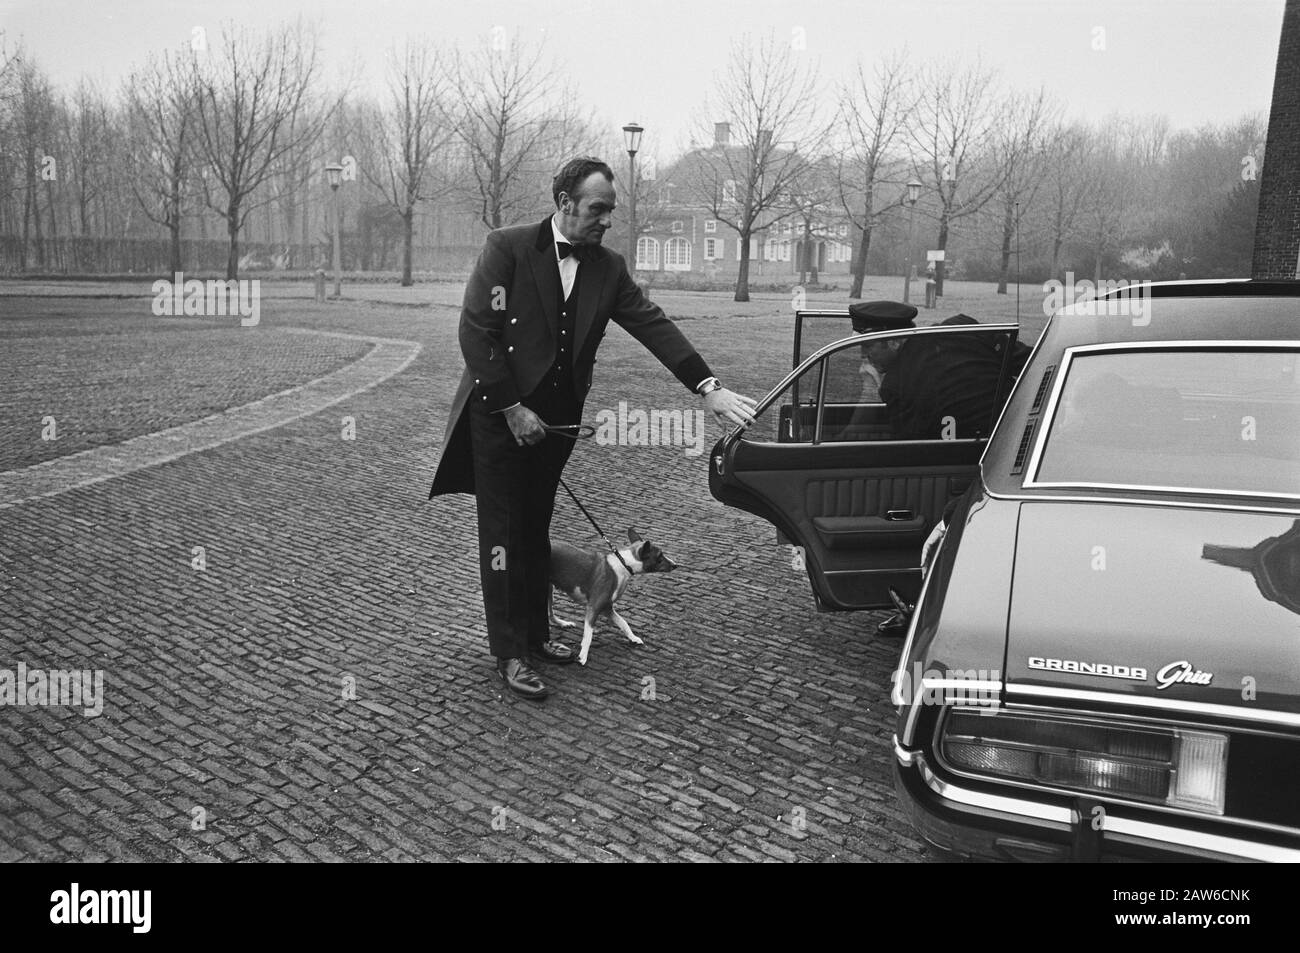 Reception of group leaders by Queen Juliana at Huis ten Bosch  Lackey with dog Sarah on arrival Queen Juliana and Prince Bernhard Date: March 24, 1977 Location: The Hague, Zuid-Holland Keywords: dogs, staff, government crises Person Name: Bernhard, prince (1911-2004), Sarah Stock Photo